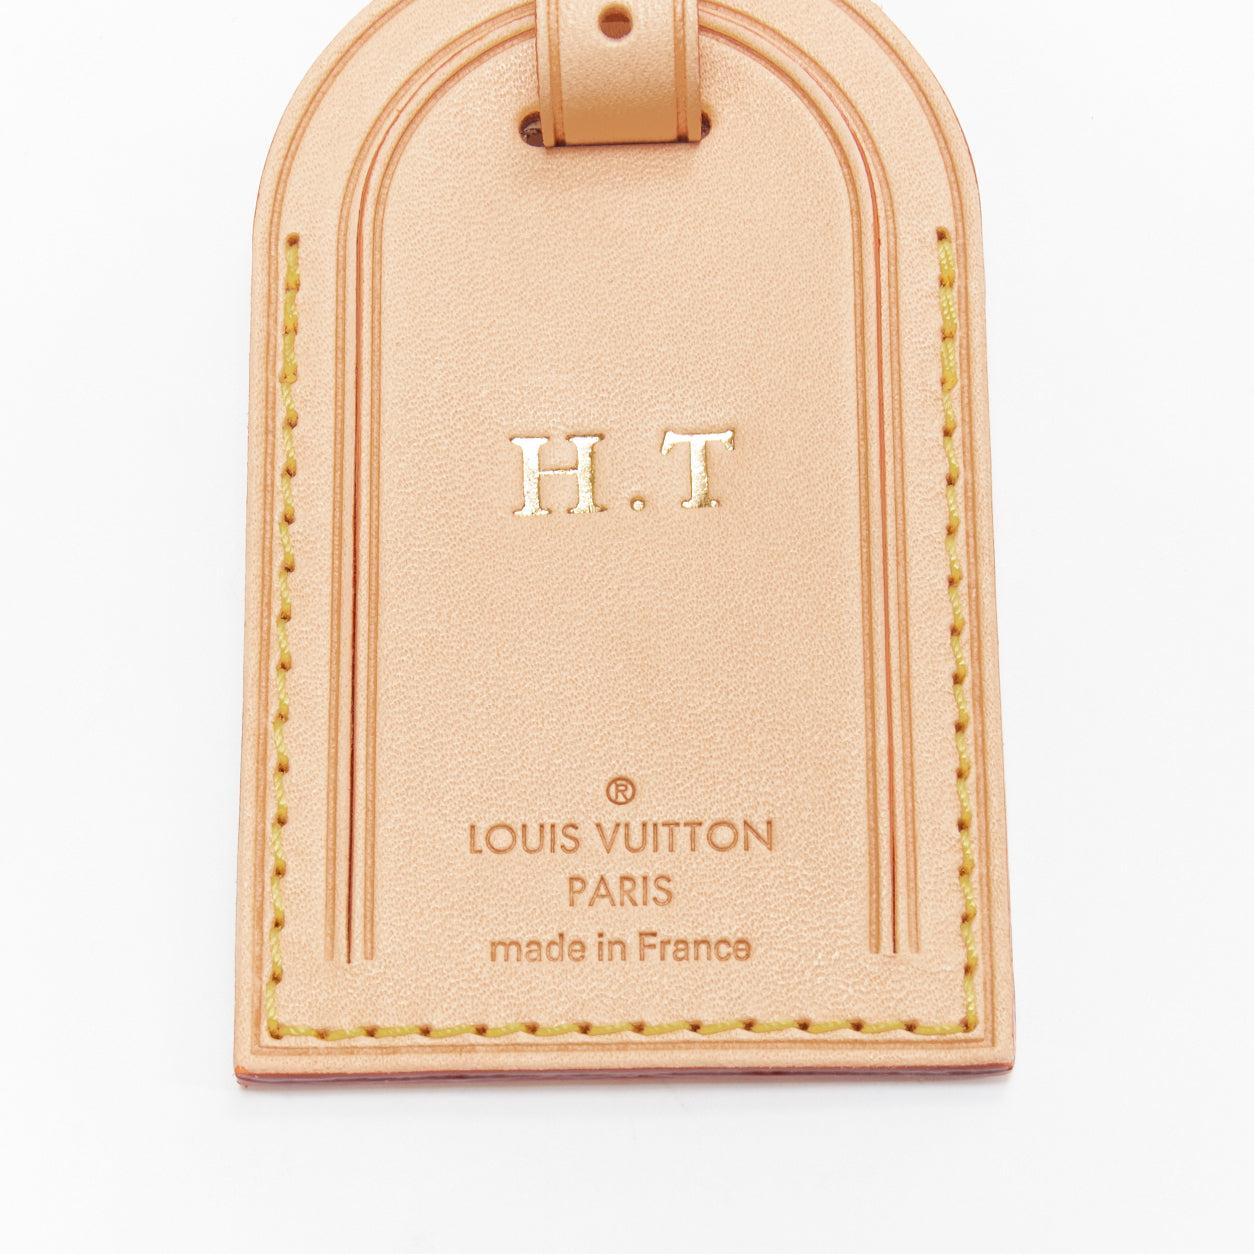 LOUIS VUITTON Vachetta leather gold HT foil stamp luggage tag In Excellent Condition For Sale In Hong Kong, NT